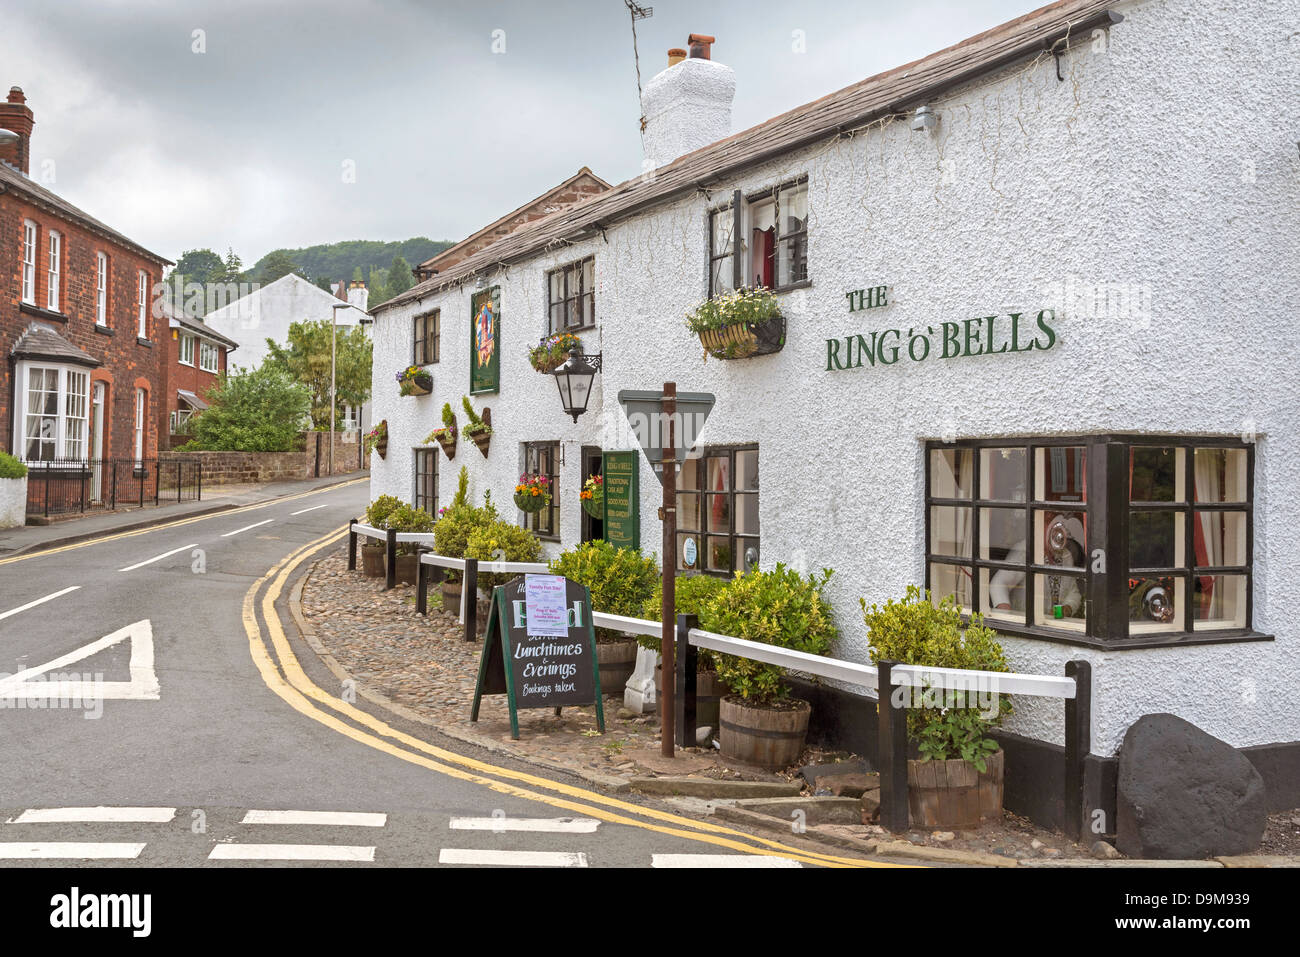 Ring O' Bells public house in Overton a suburb of Frodsham. Stock Photo